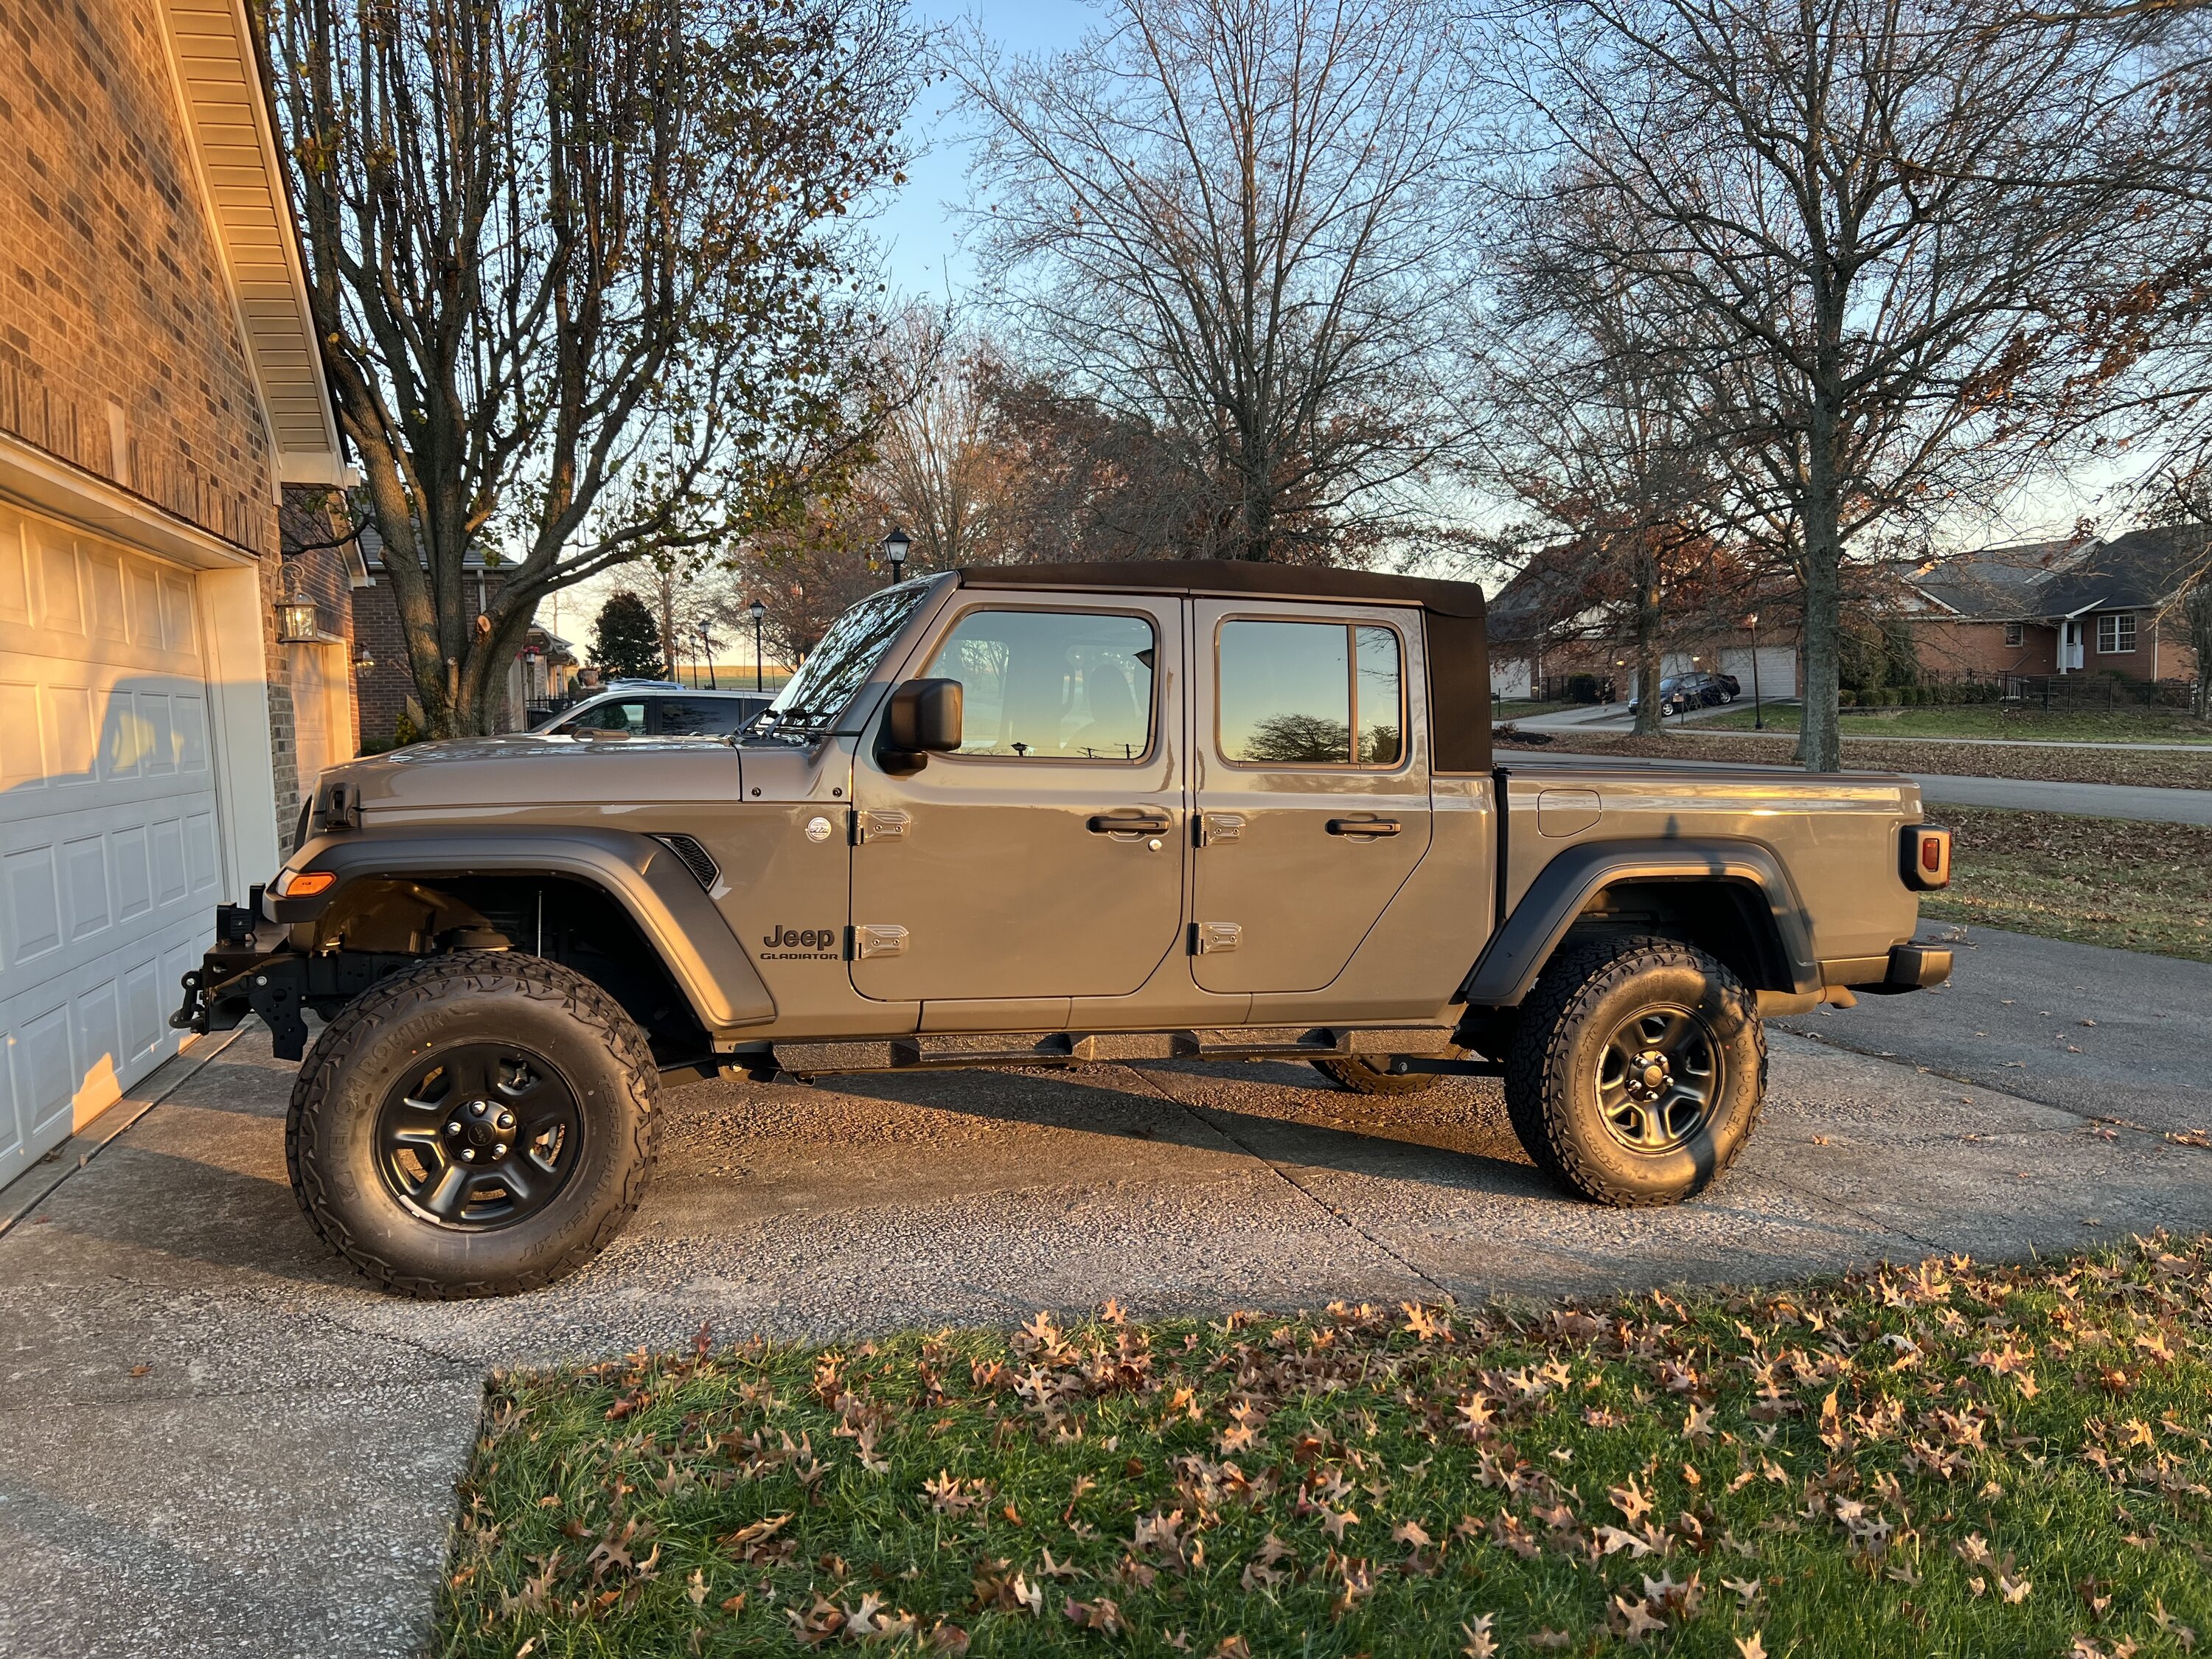 Jeep Gladiator Throwback Thursday!!! Let's see those trade-ins vs what you have now photos!!! IMG_0708